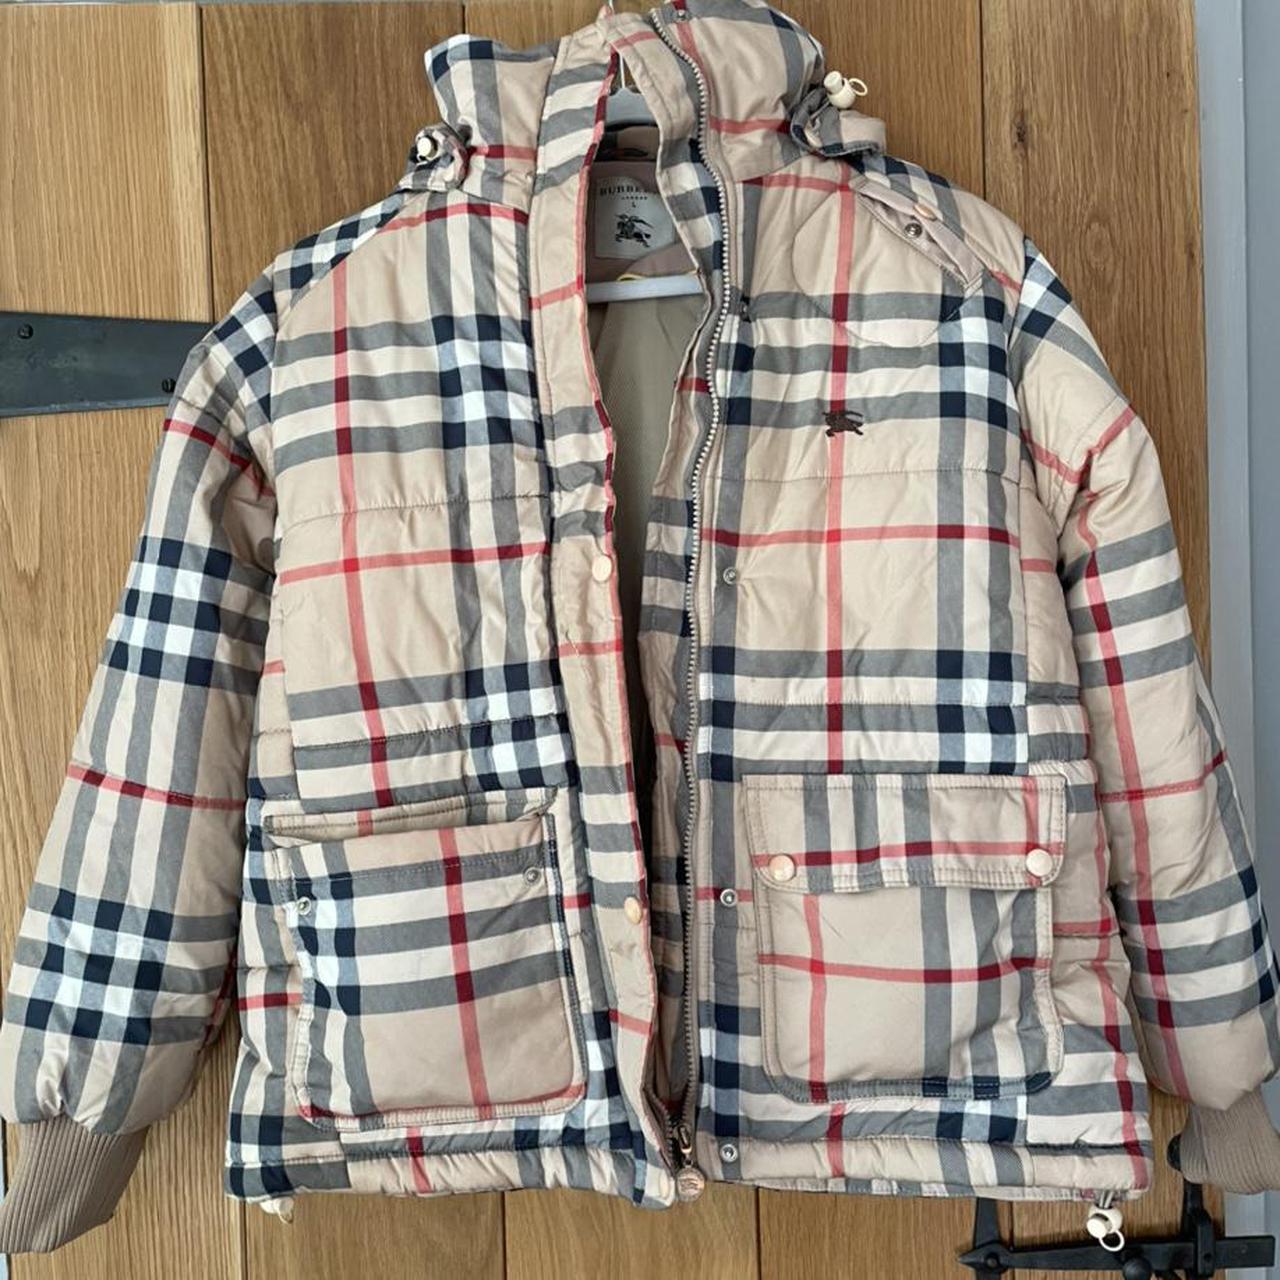 Rare Burberry puffer coat. Absolutely unreal but I... - Depop